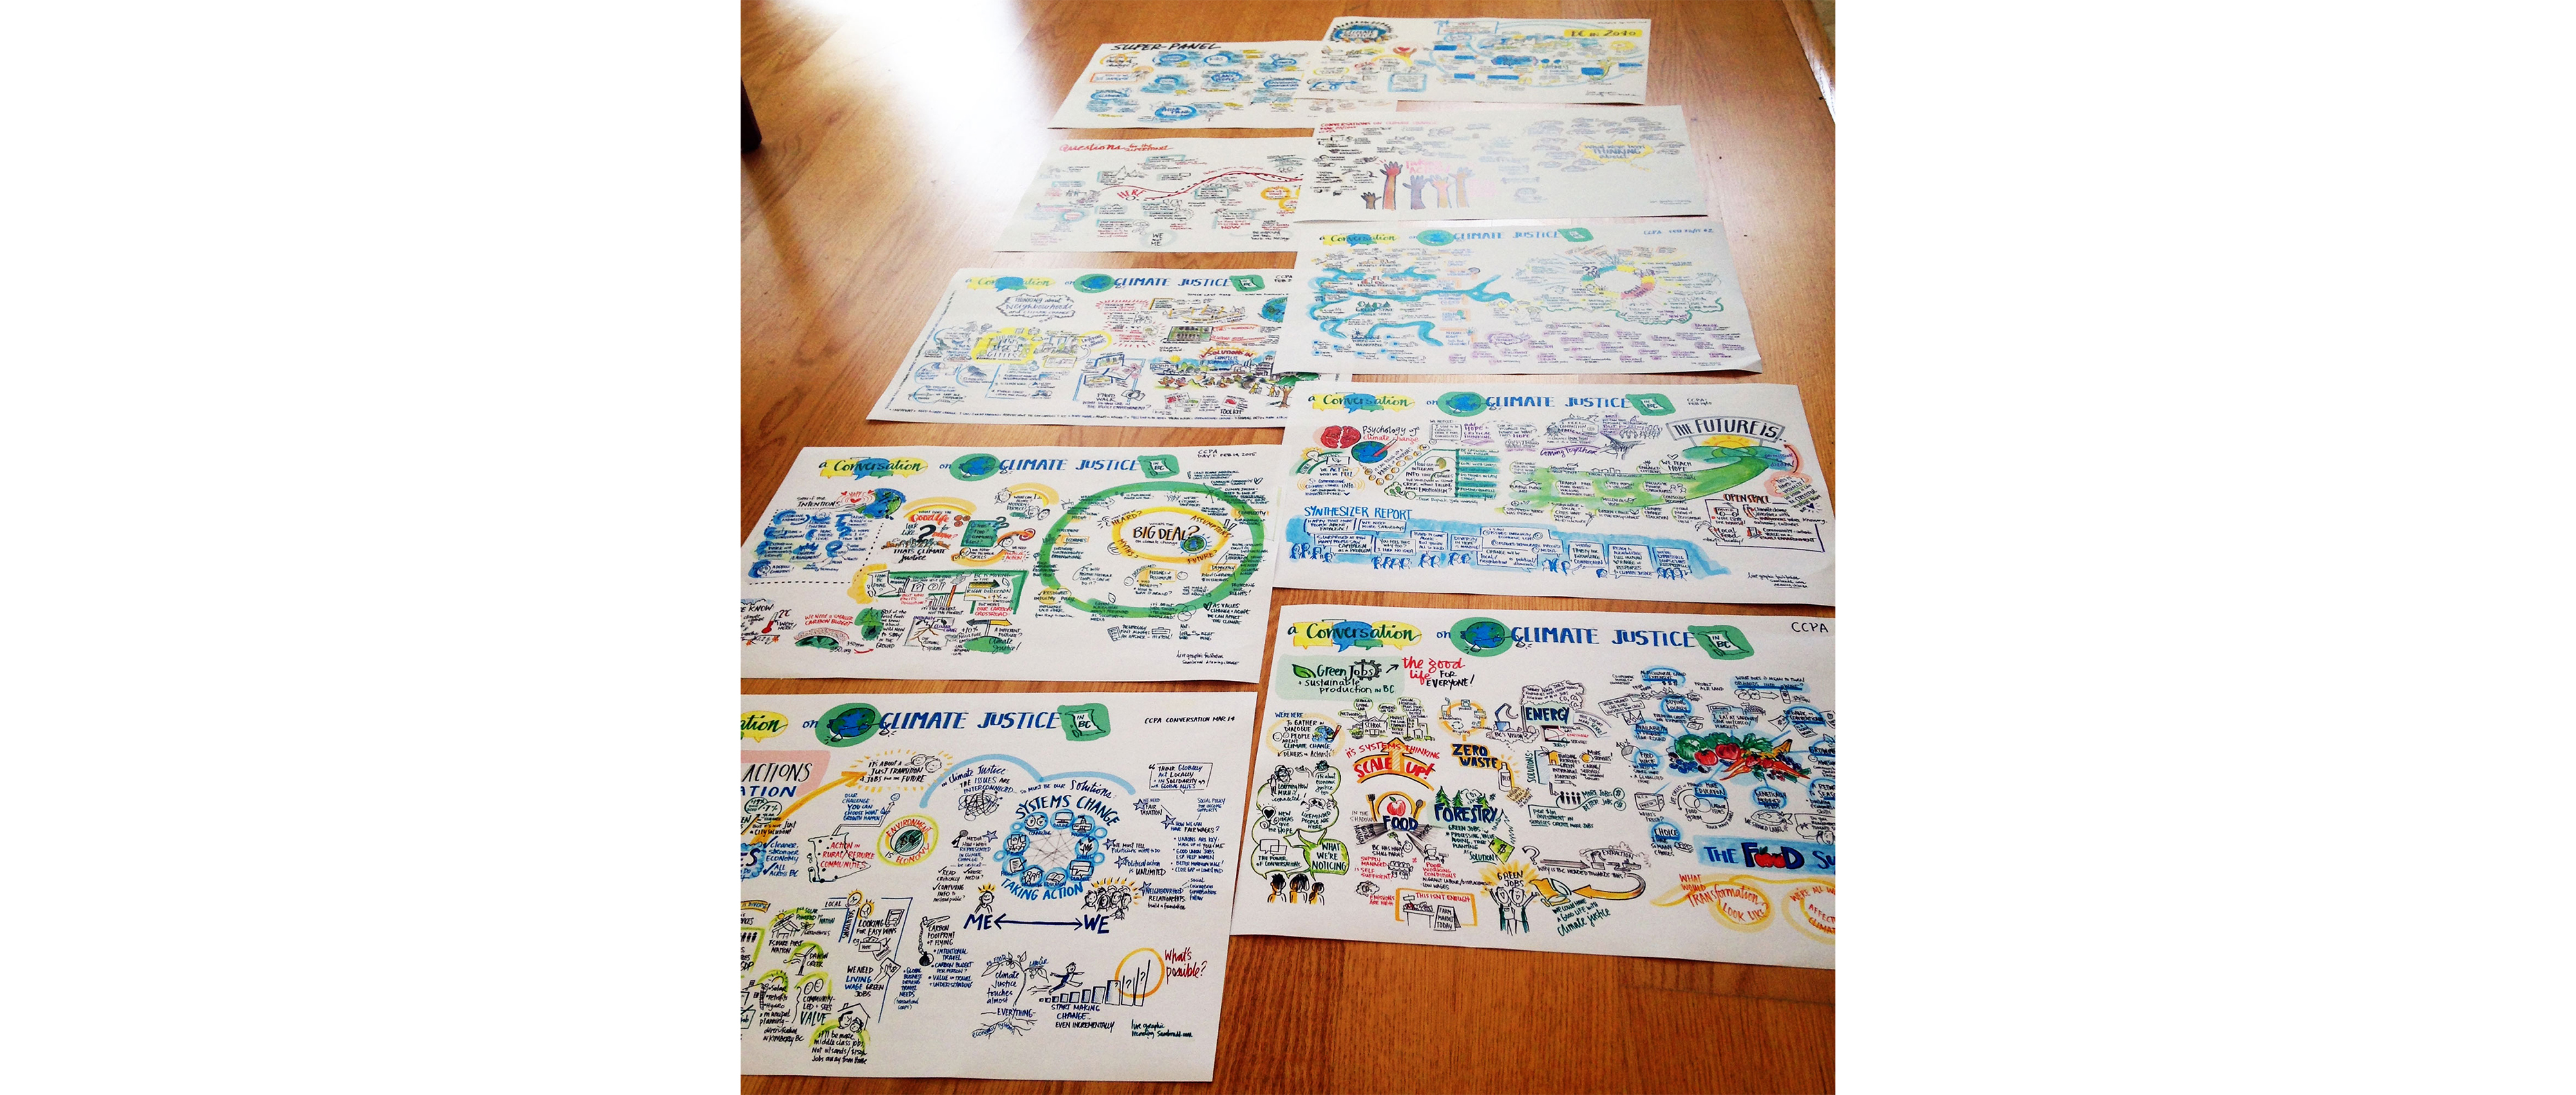 Graphic recording posters laid out in a row on the floor